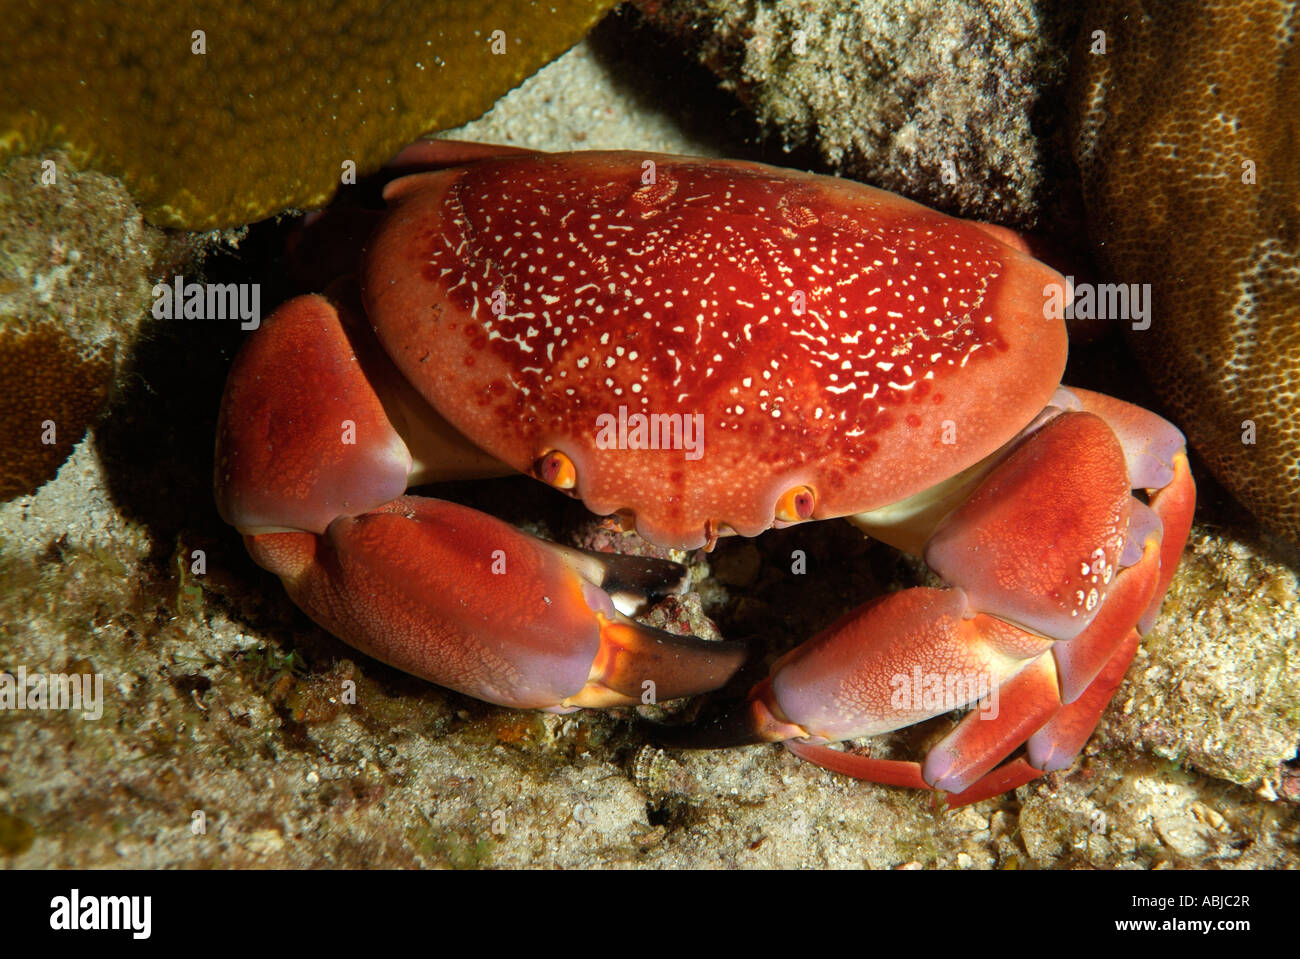 Batwing coral crab in the Gulf of Mexico off Texas Stock Photo